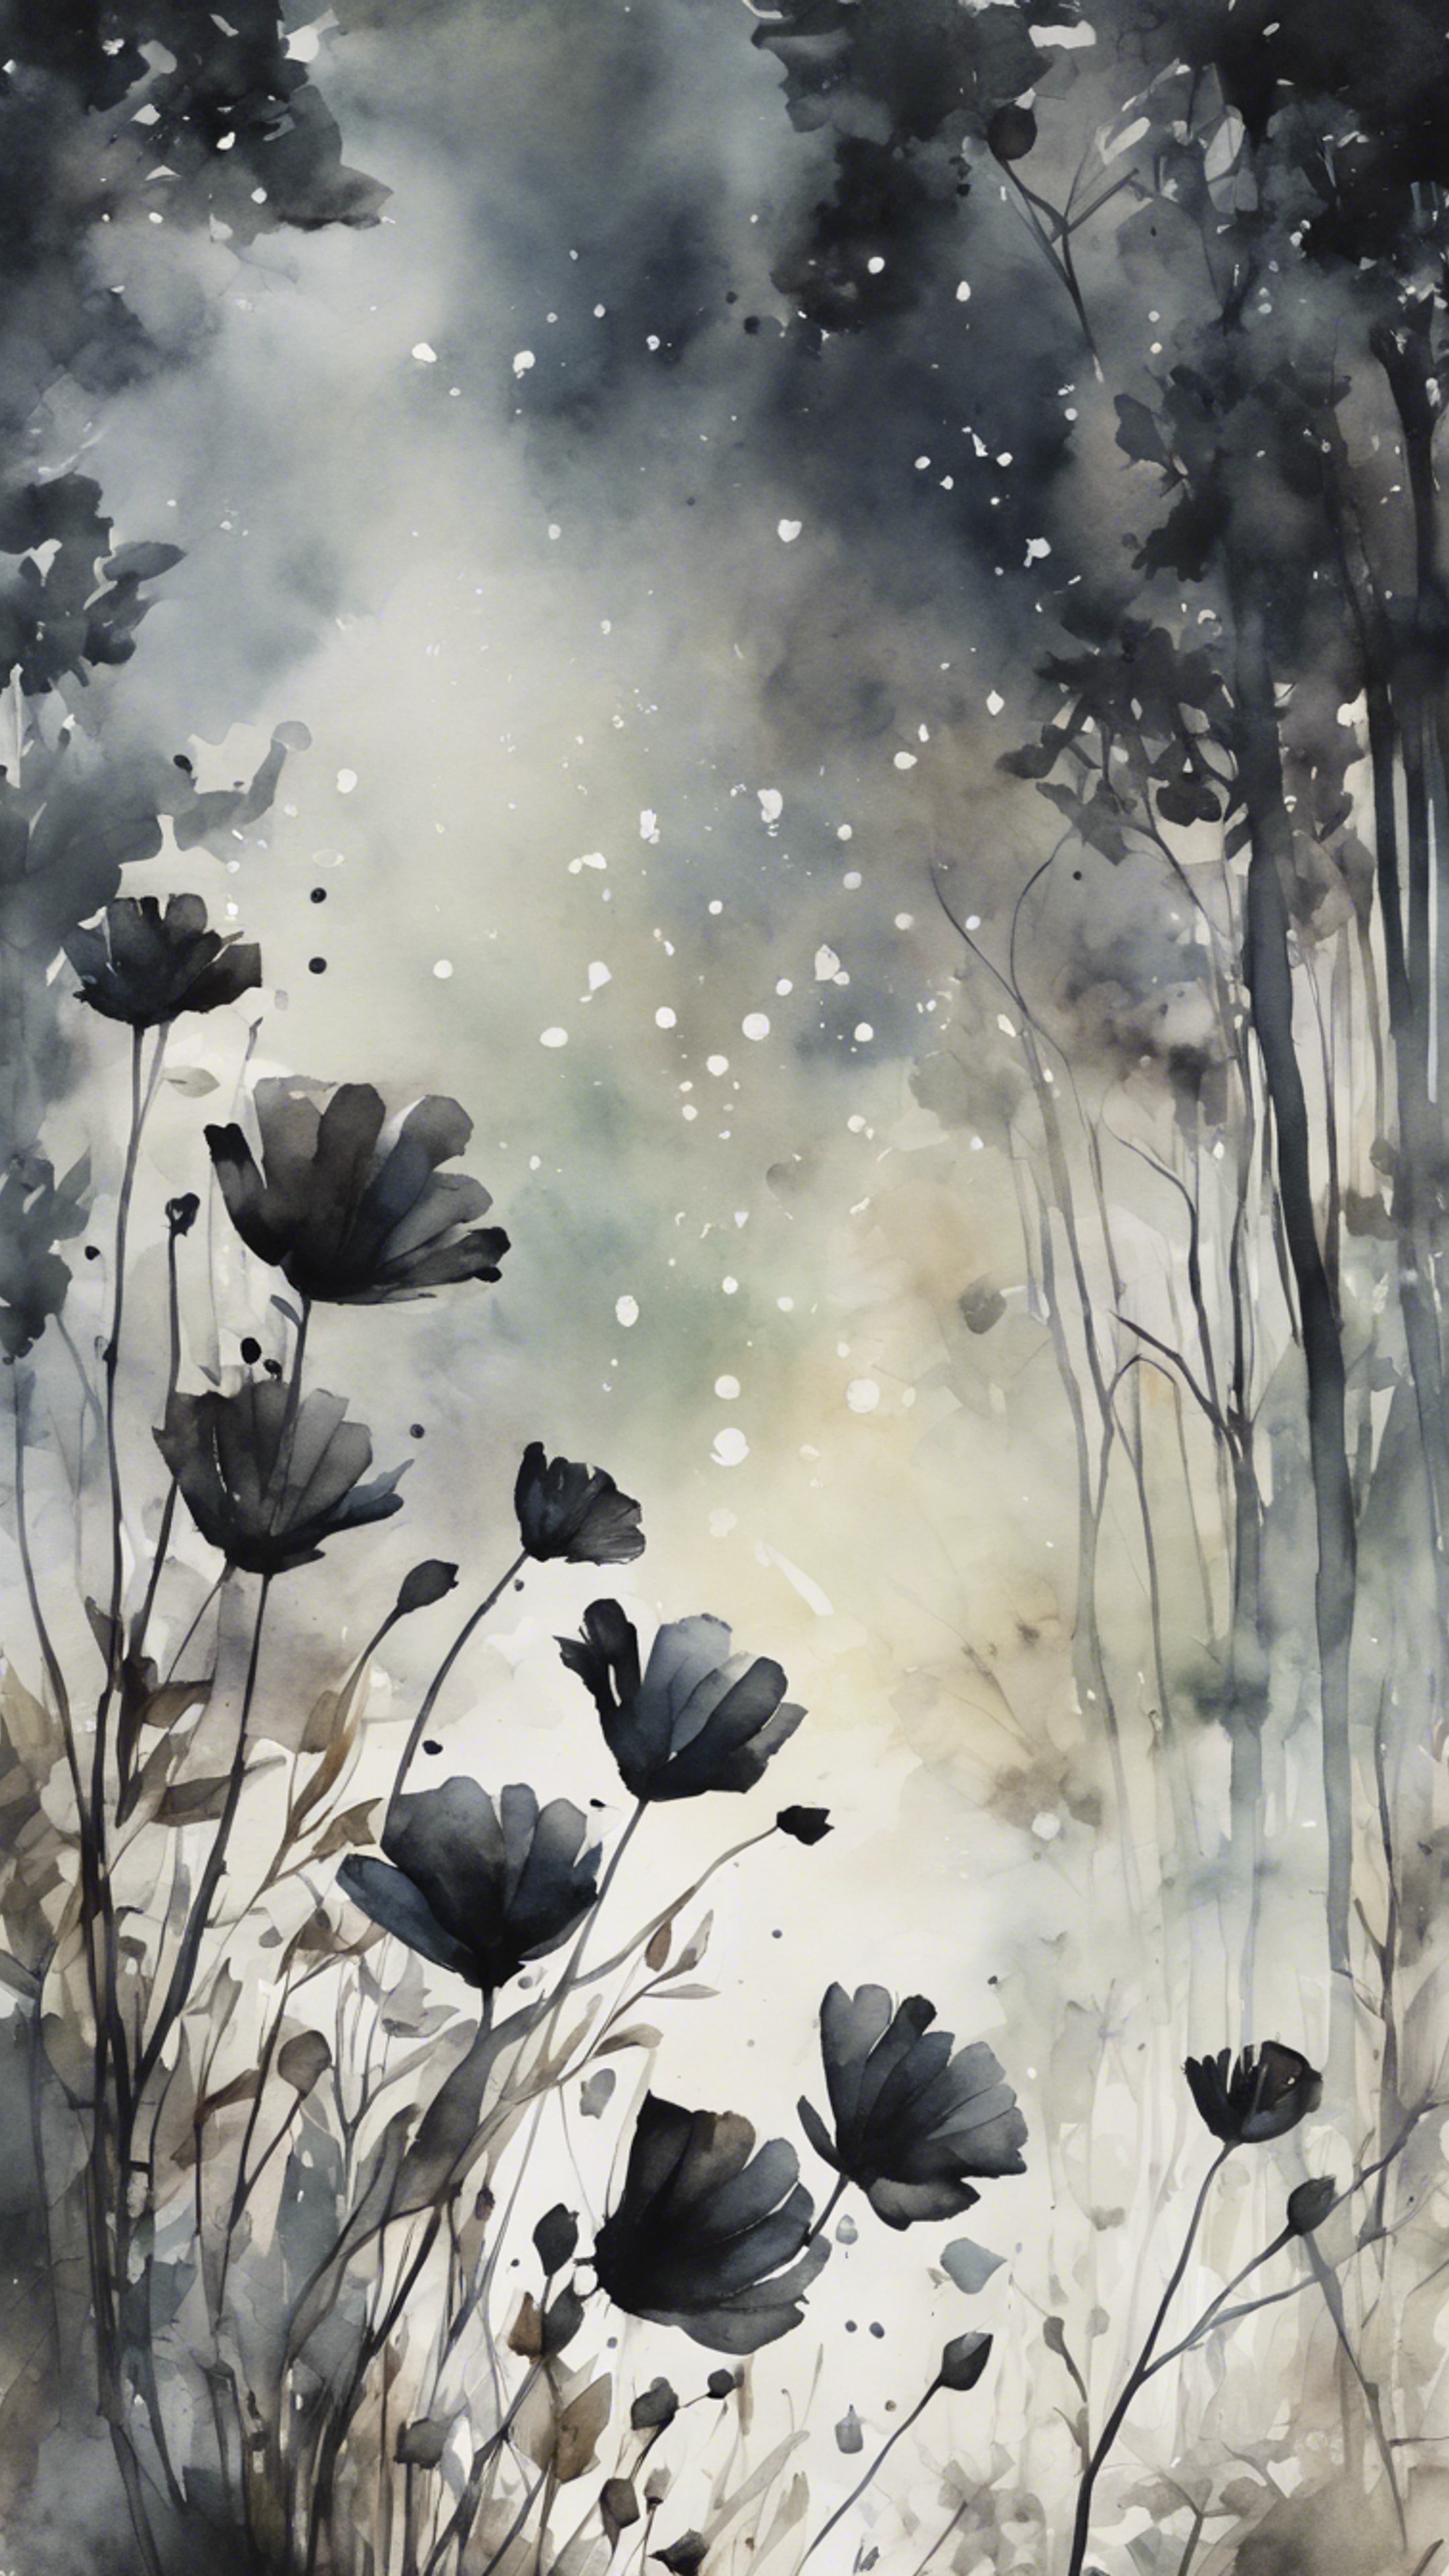 A dreamy watercolor painting depicting black flowers blooming in the heart of a dense forest. Tapeta[006f57e6dd8144ebb2db]